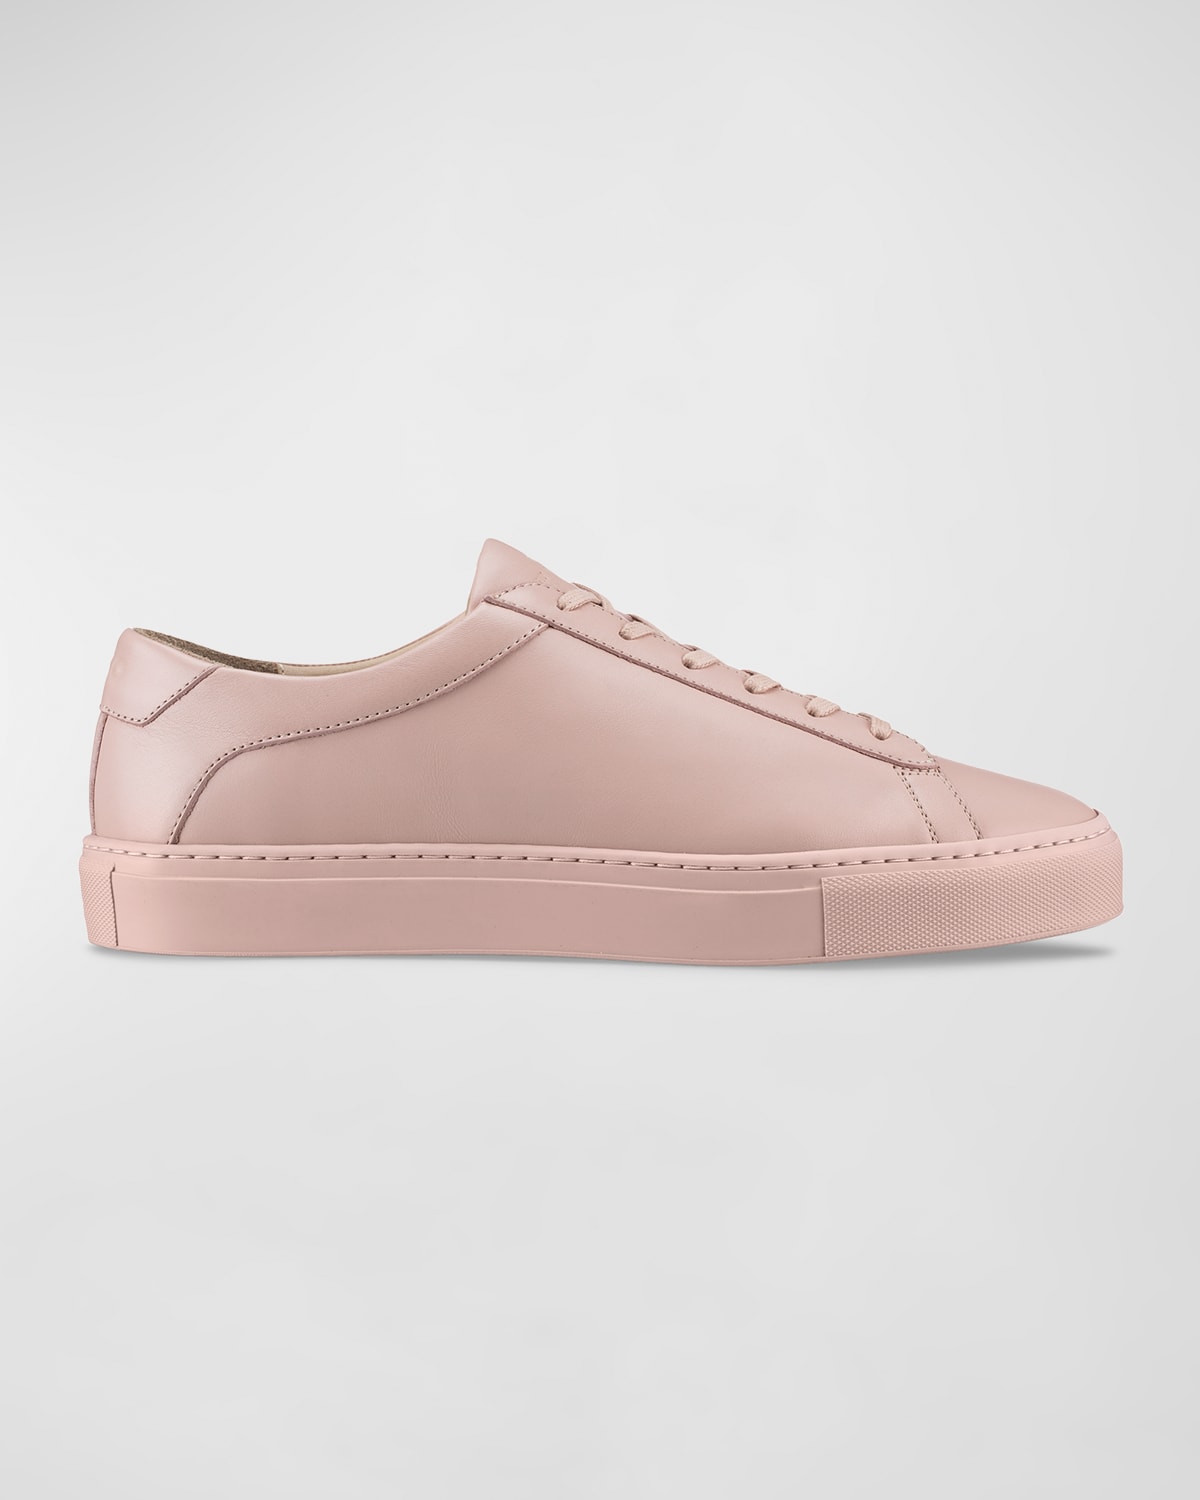 Koio Capri Mixed Leather Low-top Sneakers In Fiore